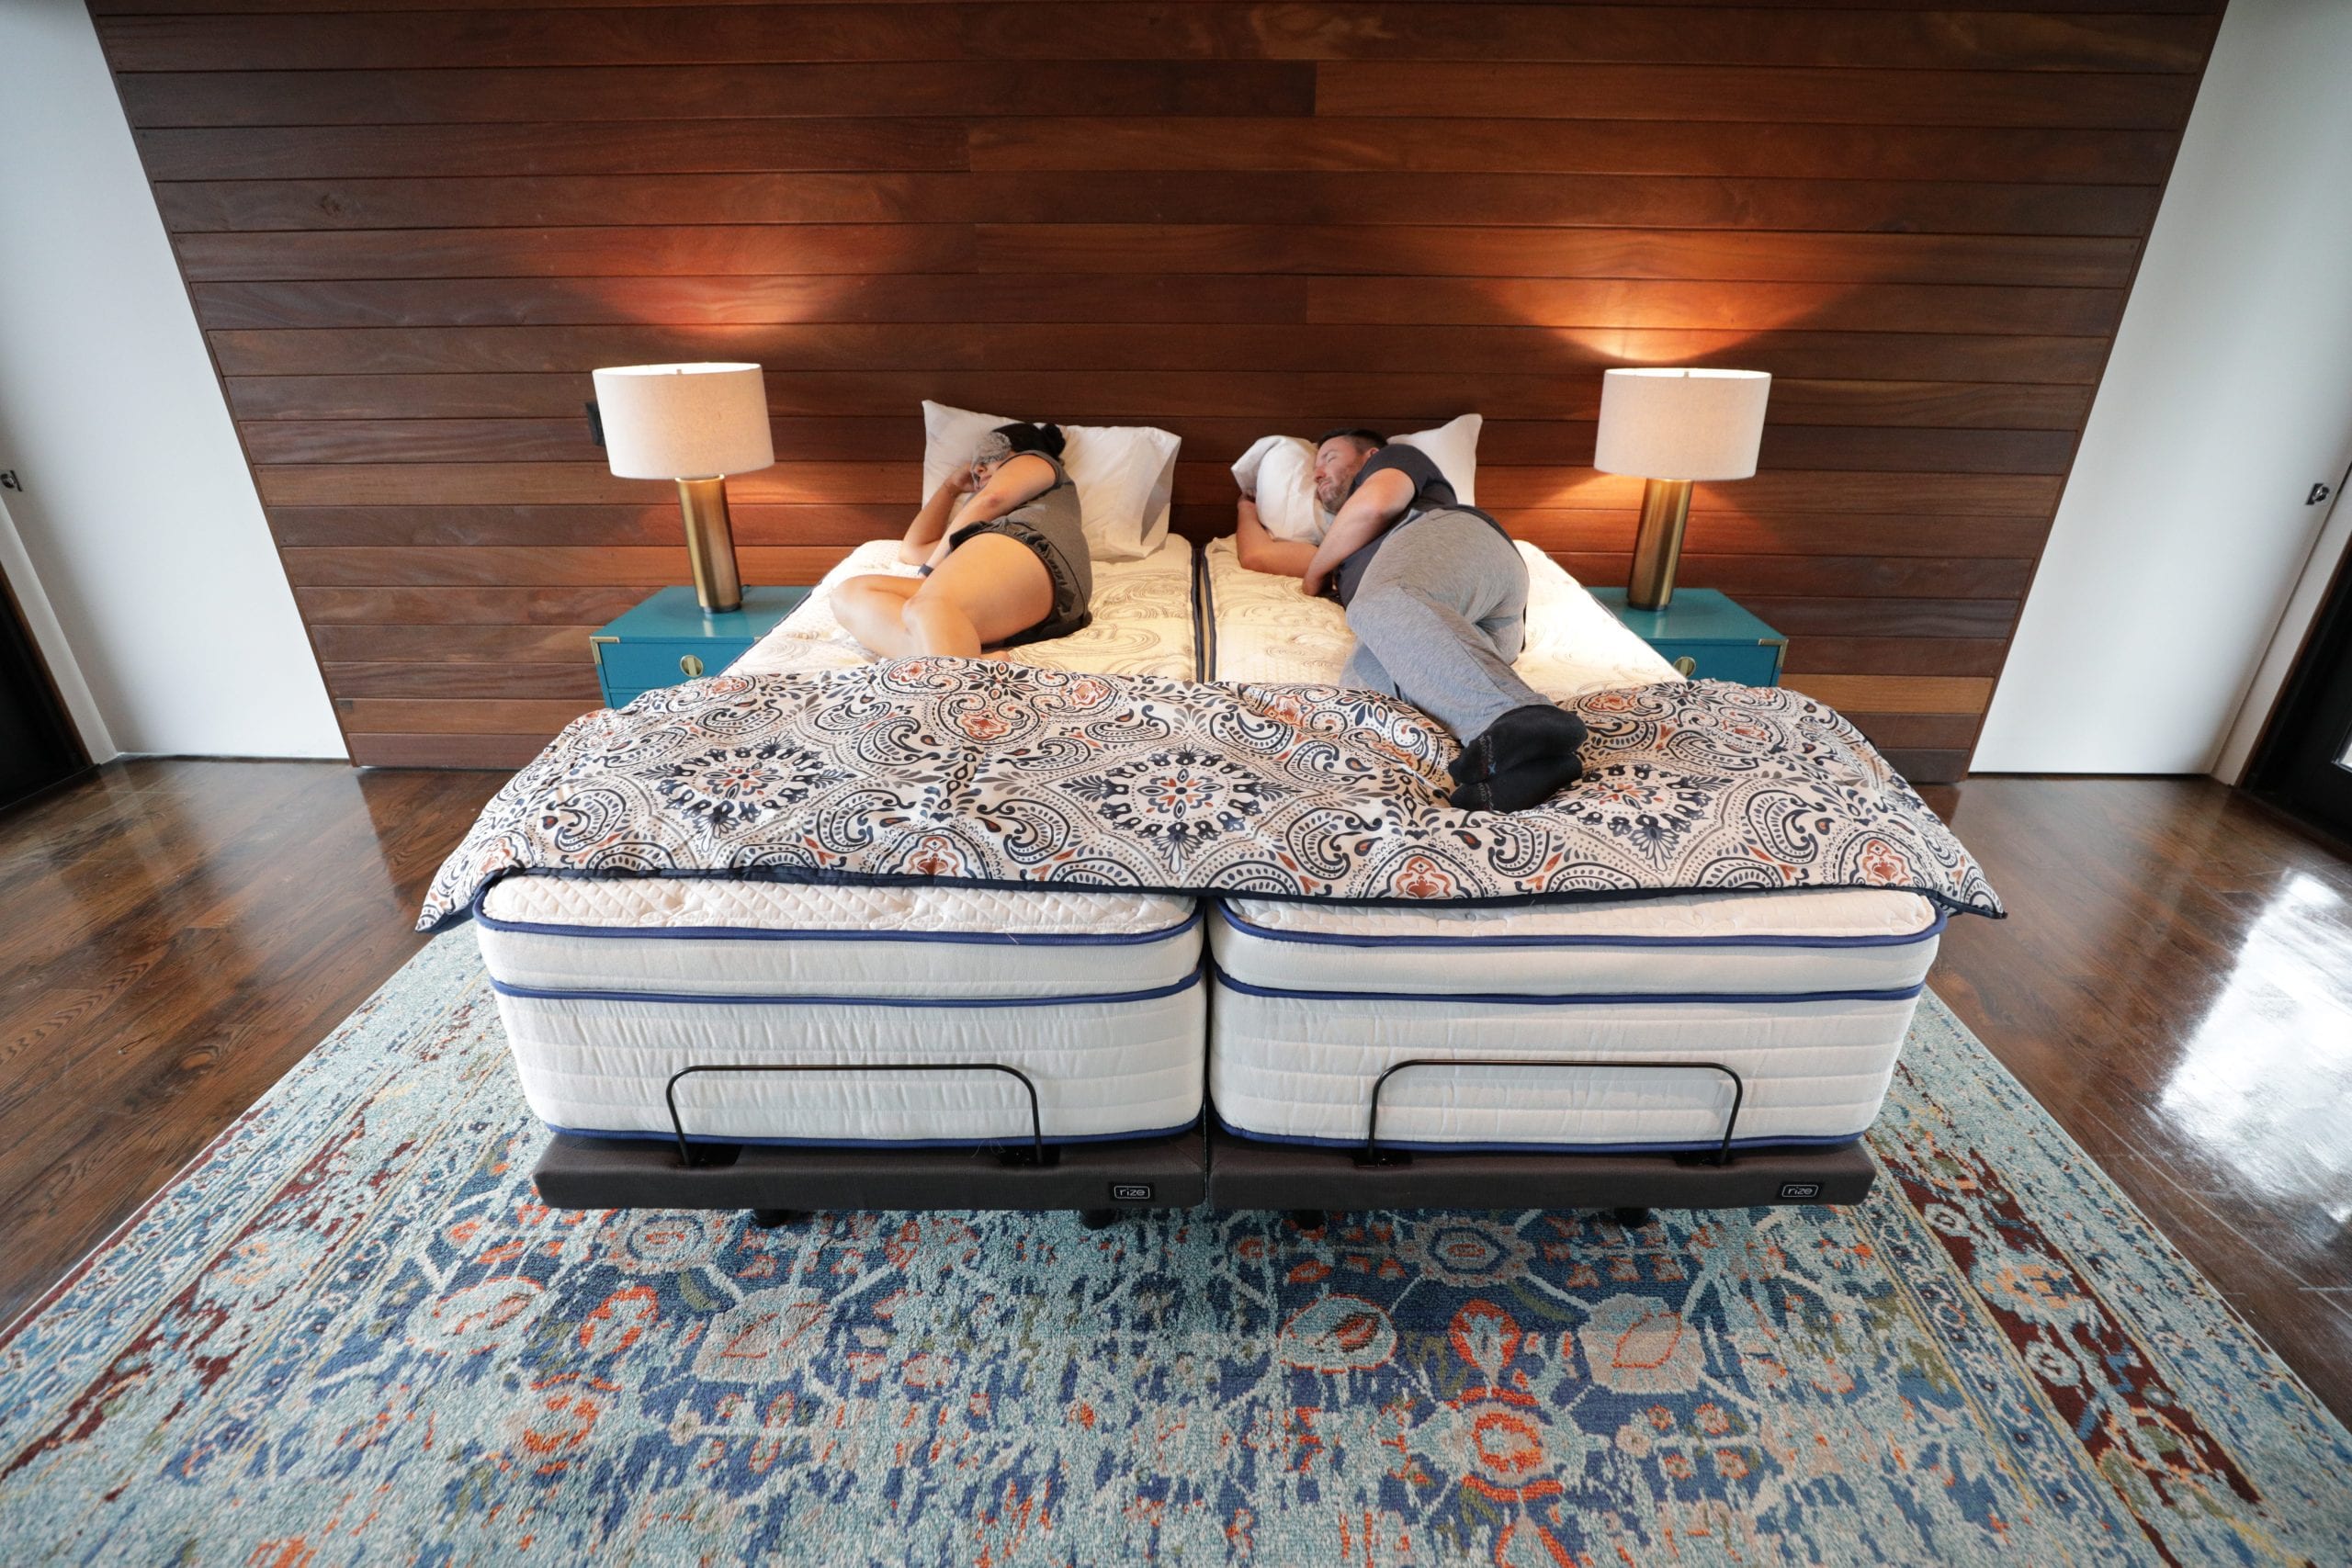 How to Turn Two Twin Size Mattresses Into a King Size Mattress